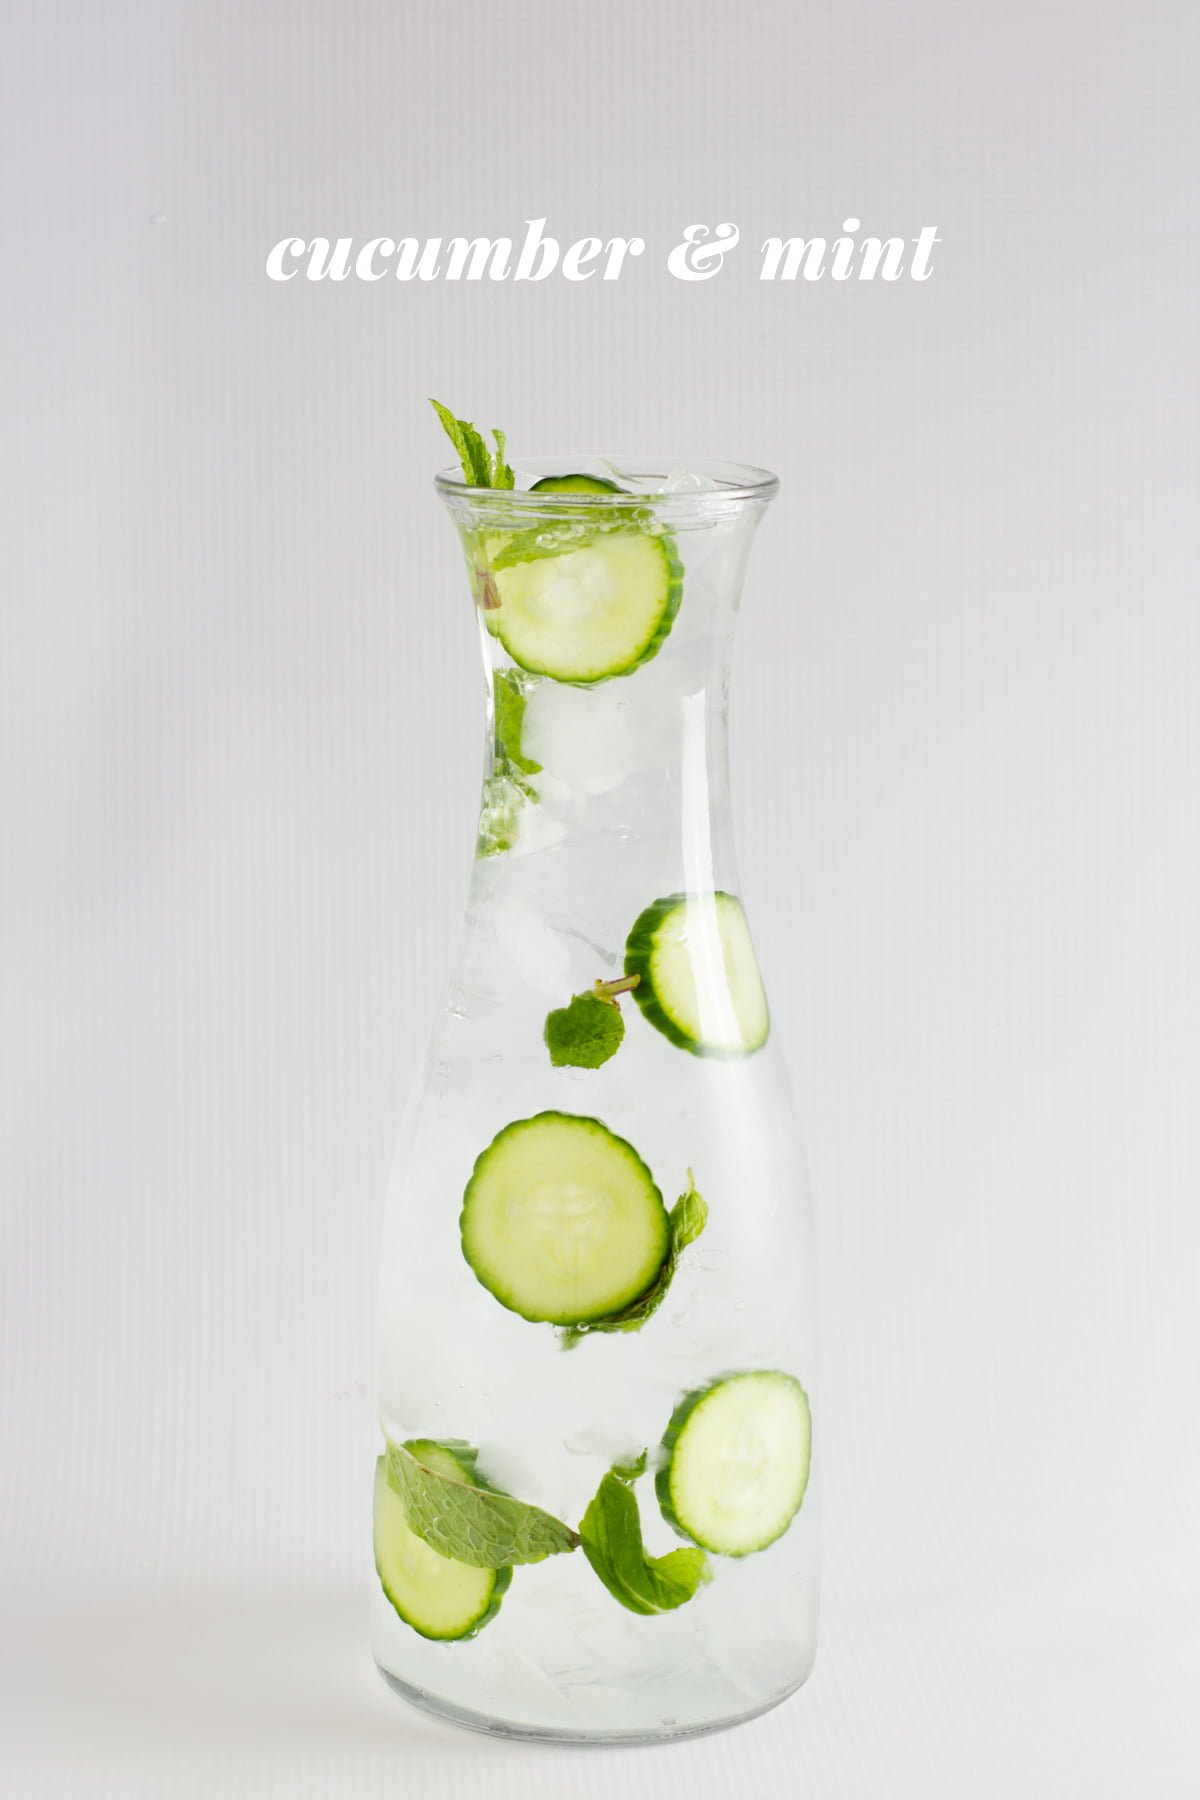 Cucumber and mint infused water is displayed in a glass carafe. A text overlay reads, "Cucumber & Mint."